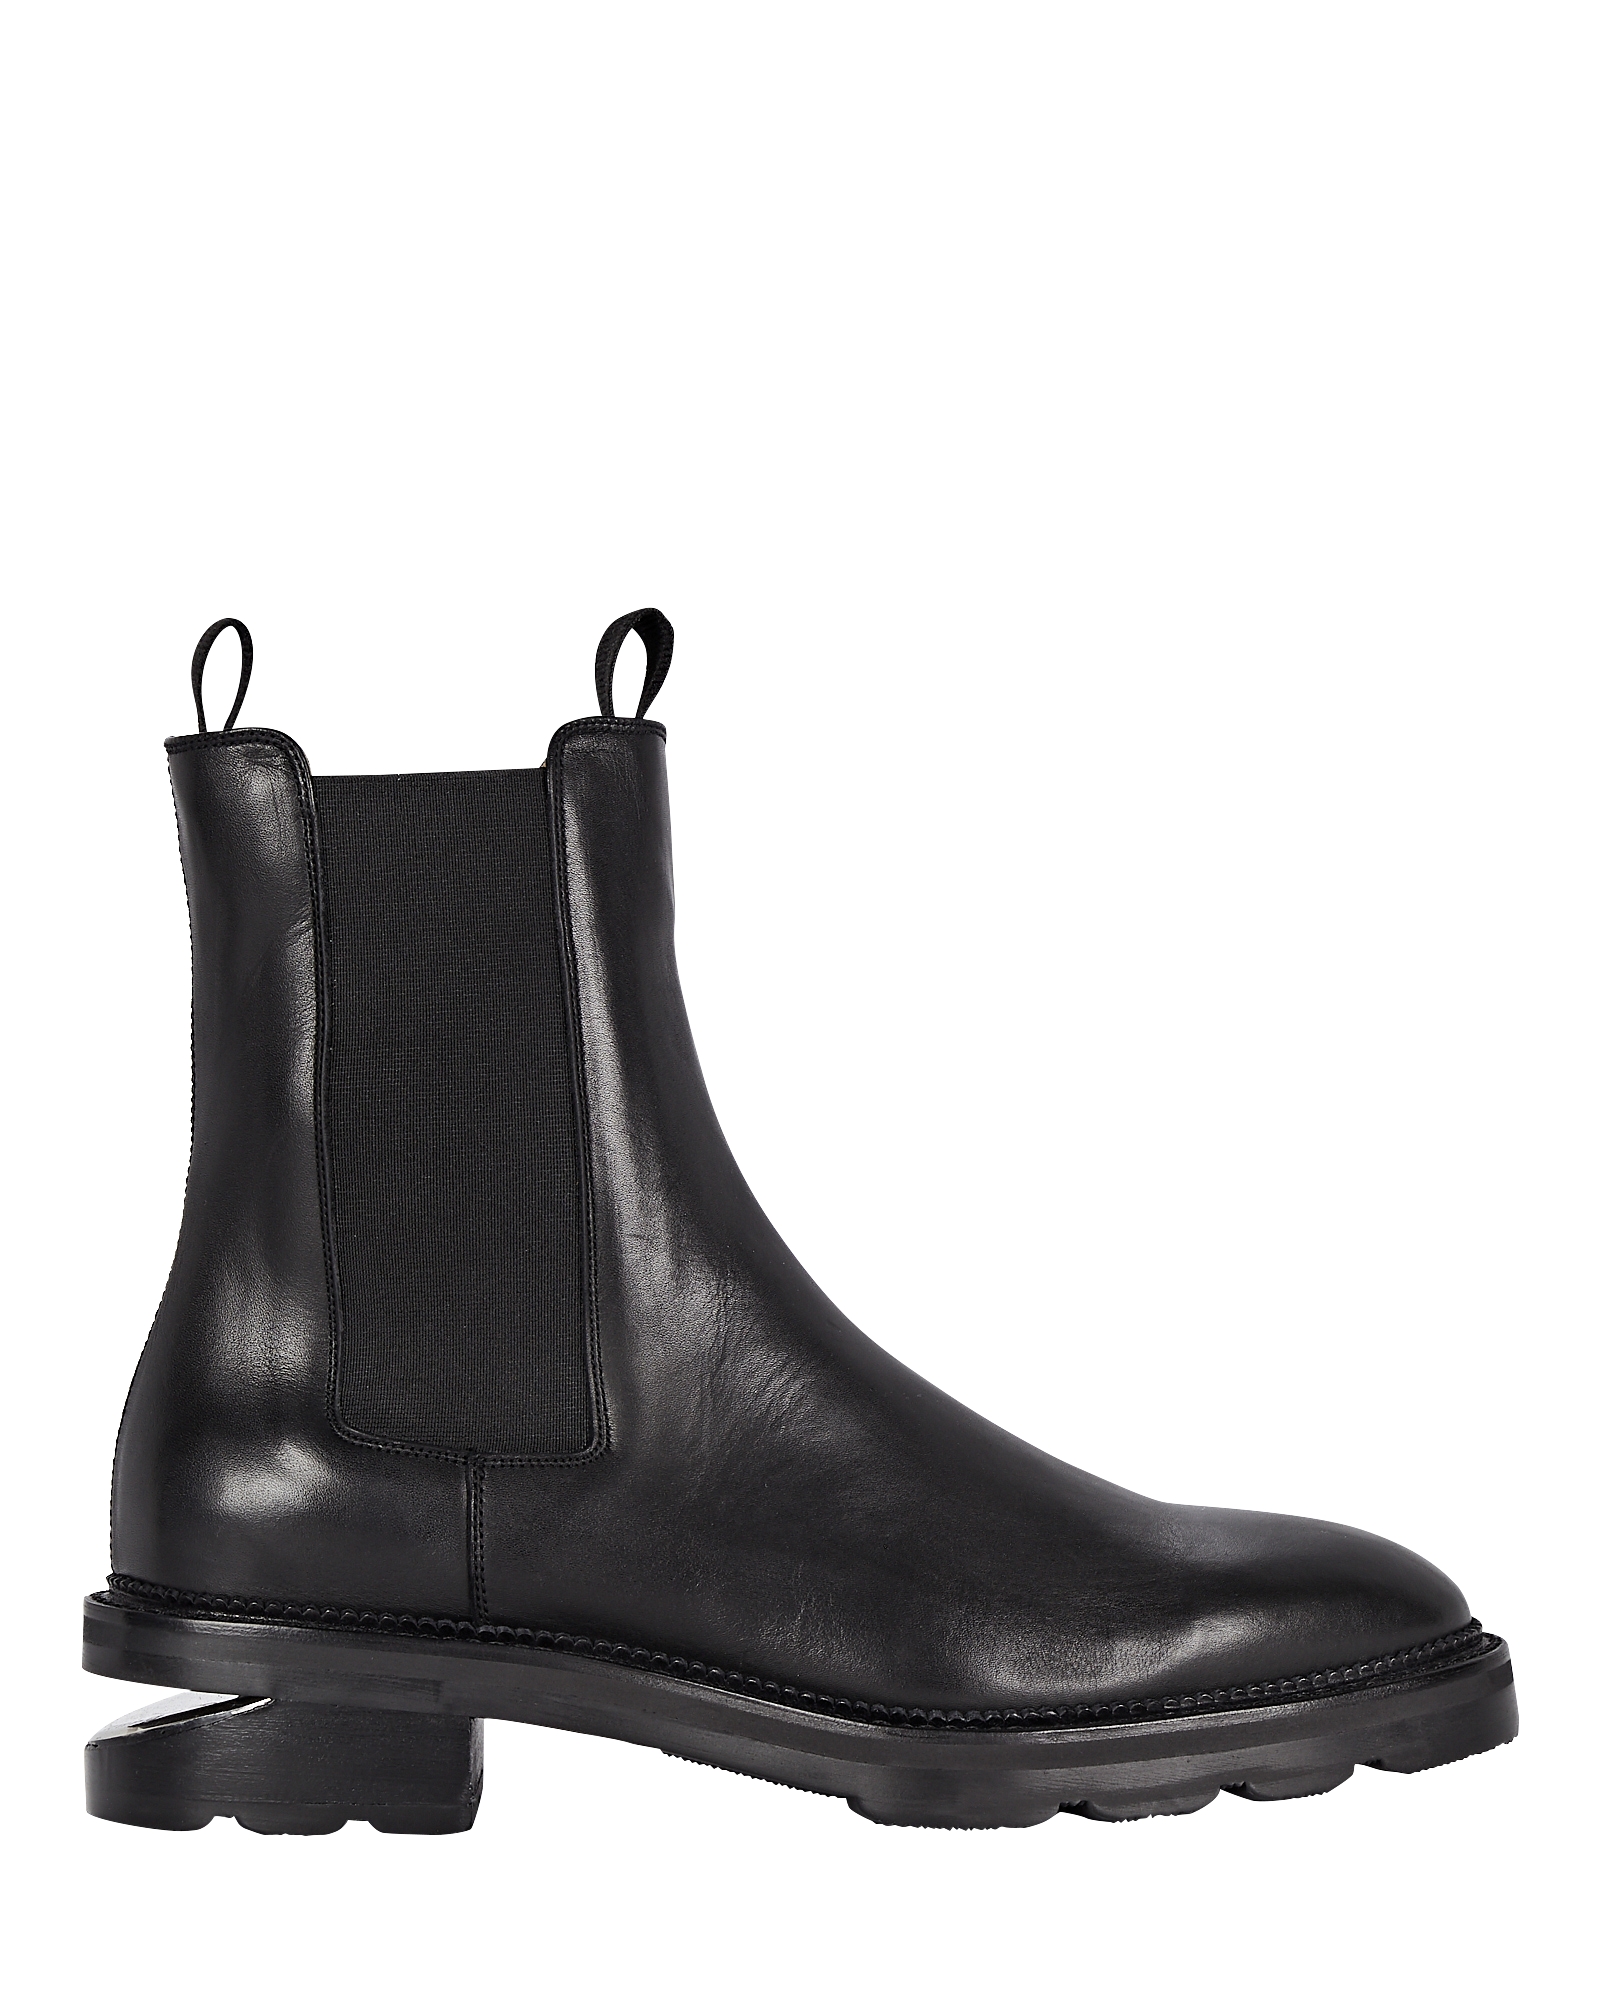 Alexander Wang Andy Leather Chelsea Ankle Boots | INTERMIX®